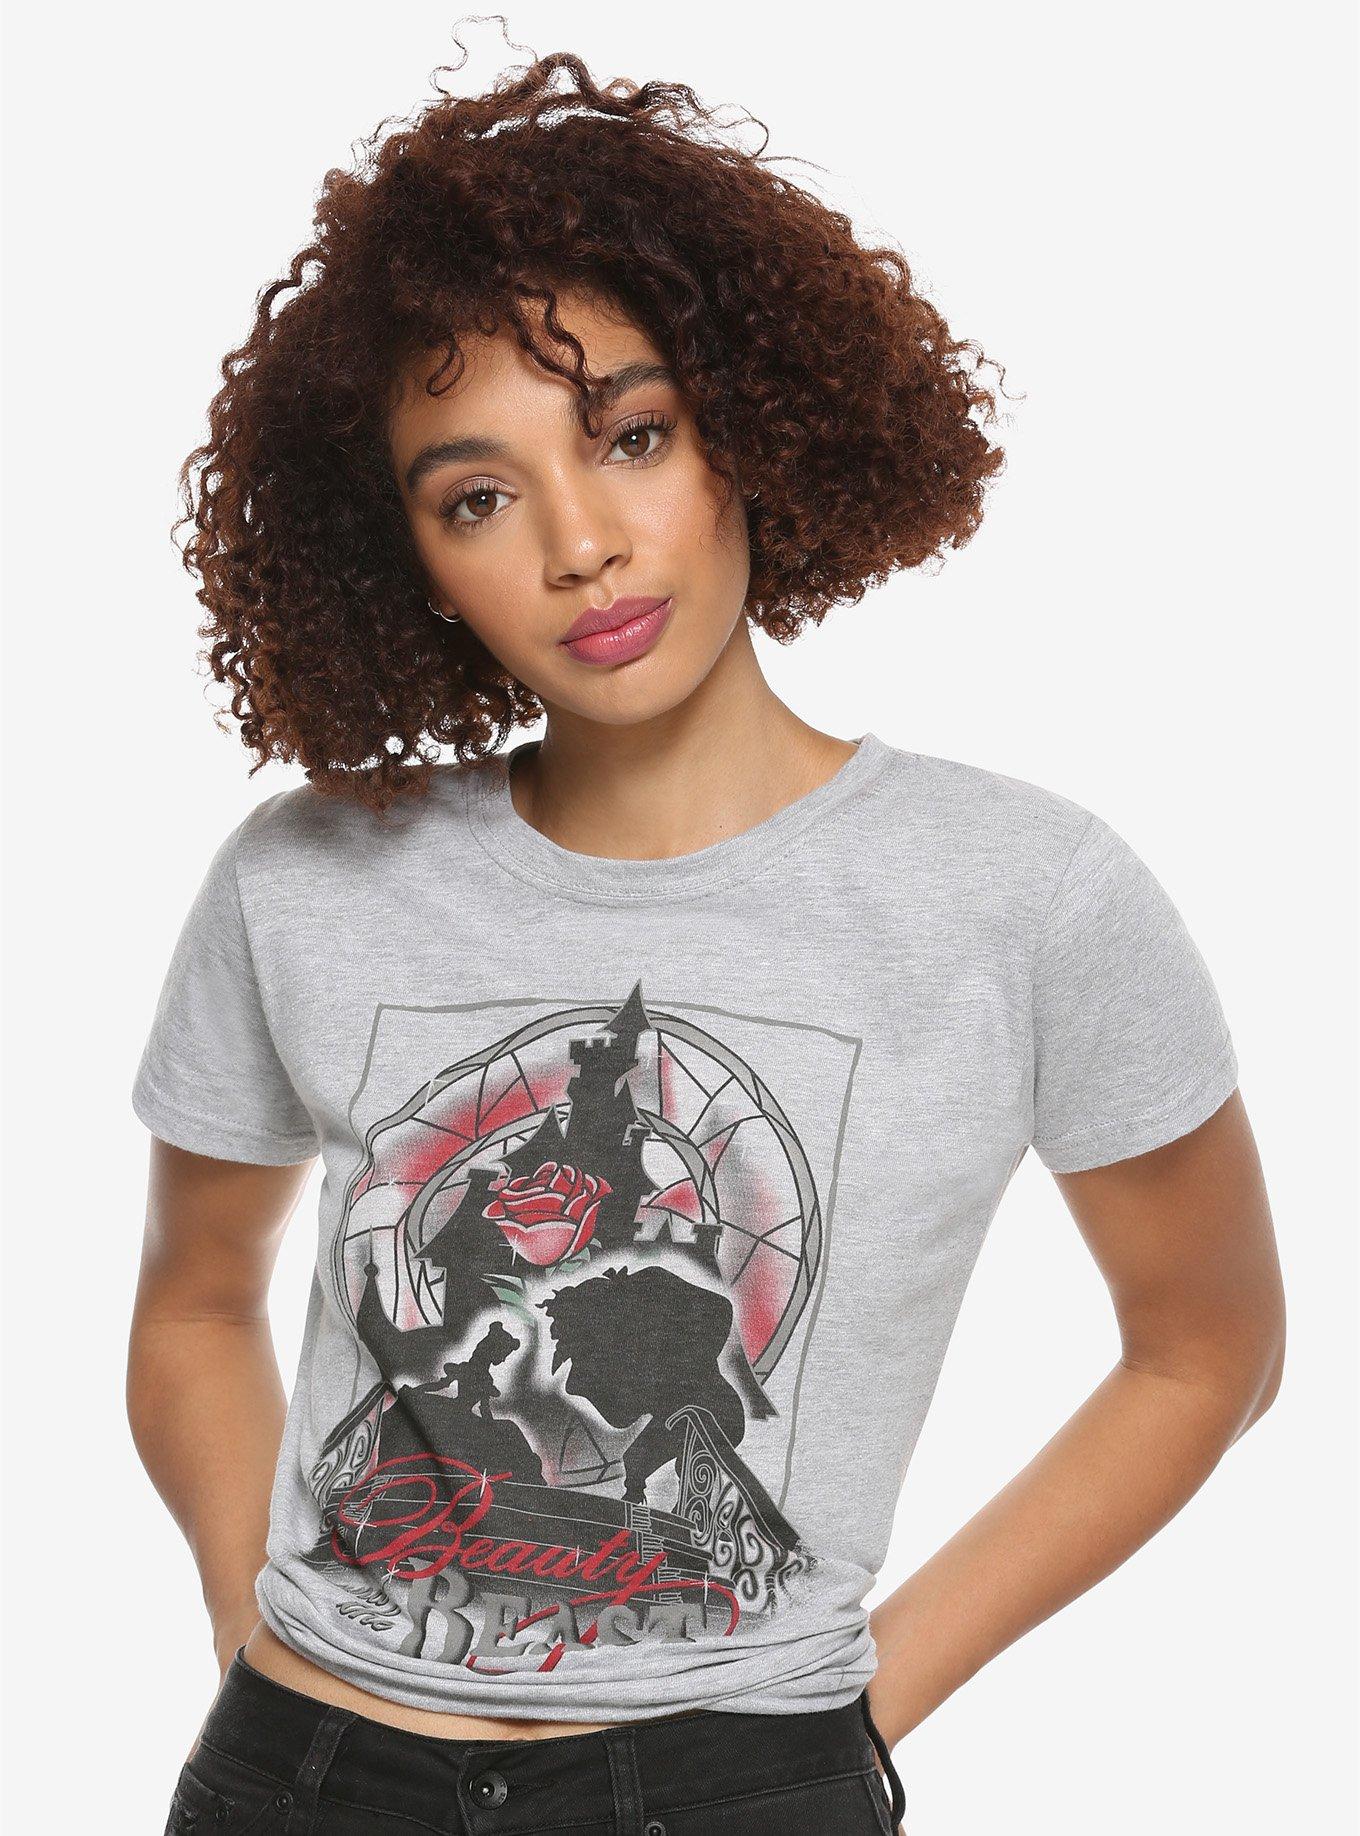 Disney Beauty And The Beast Silhouette Stained Glass Girls T-Shirt, MULTI, hi-res